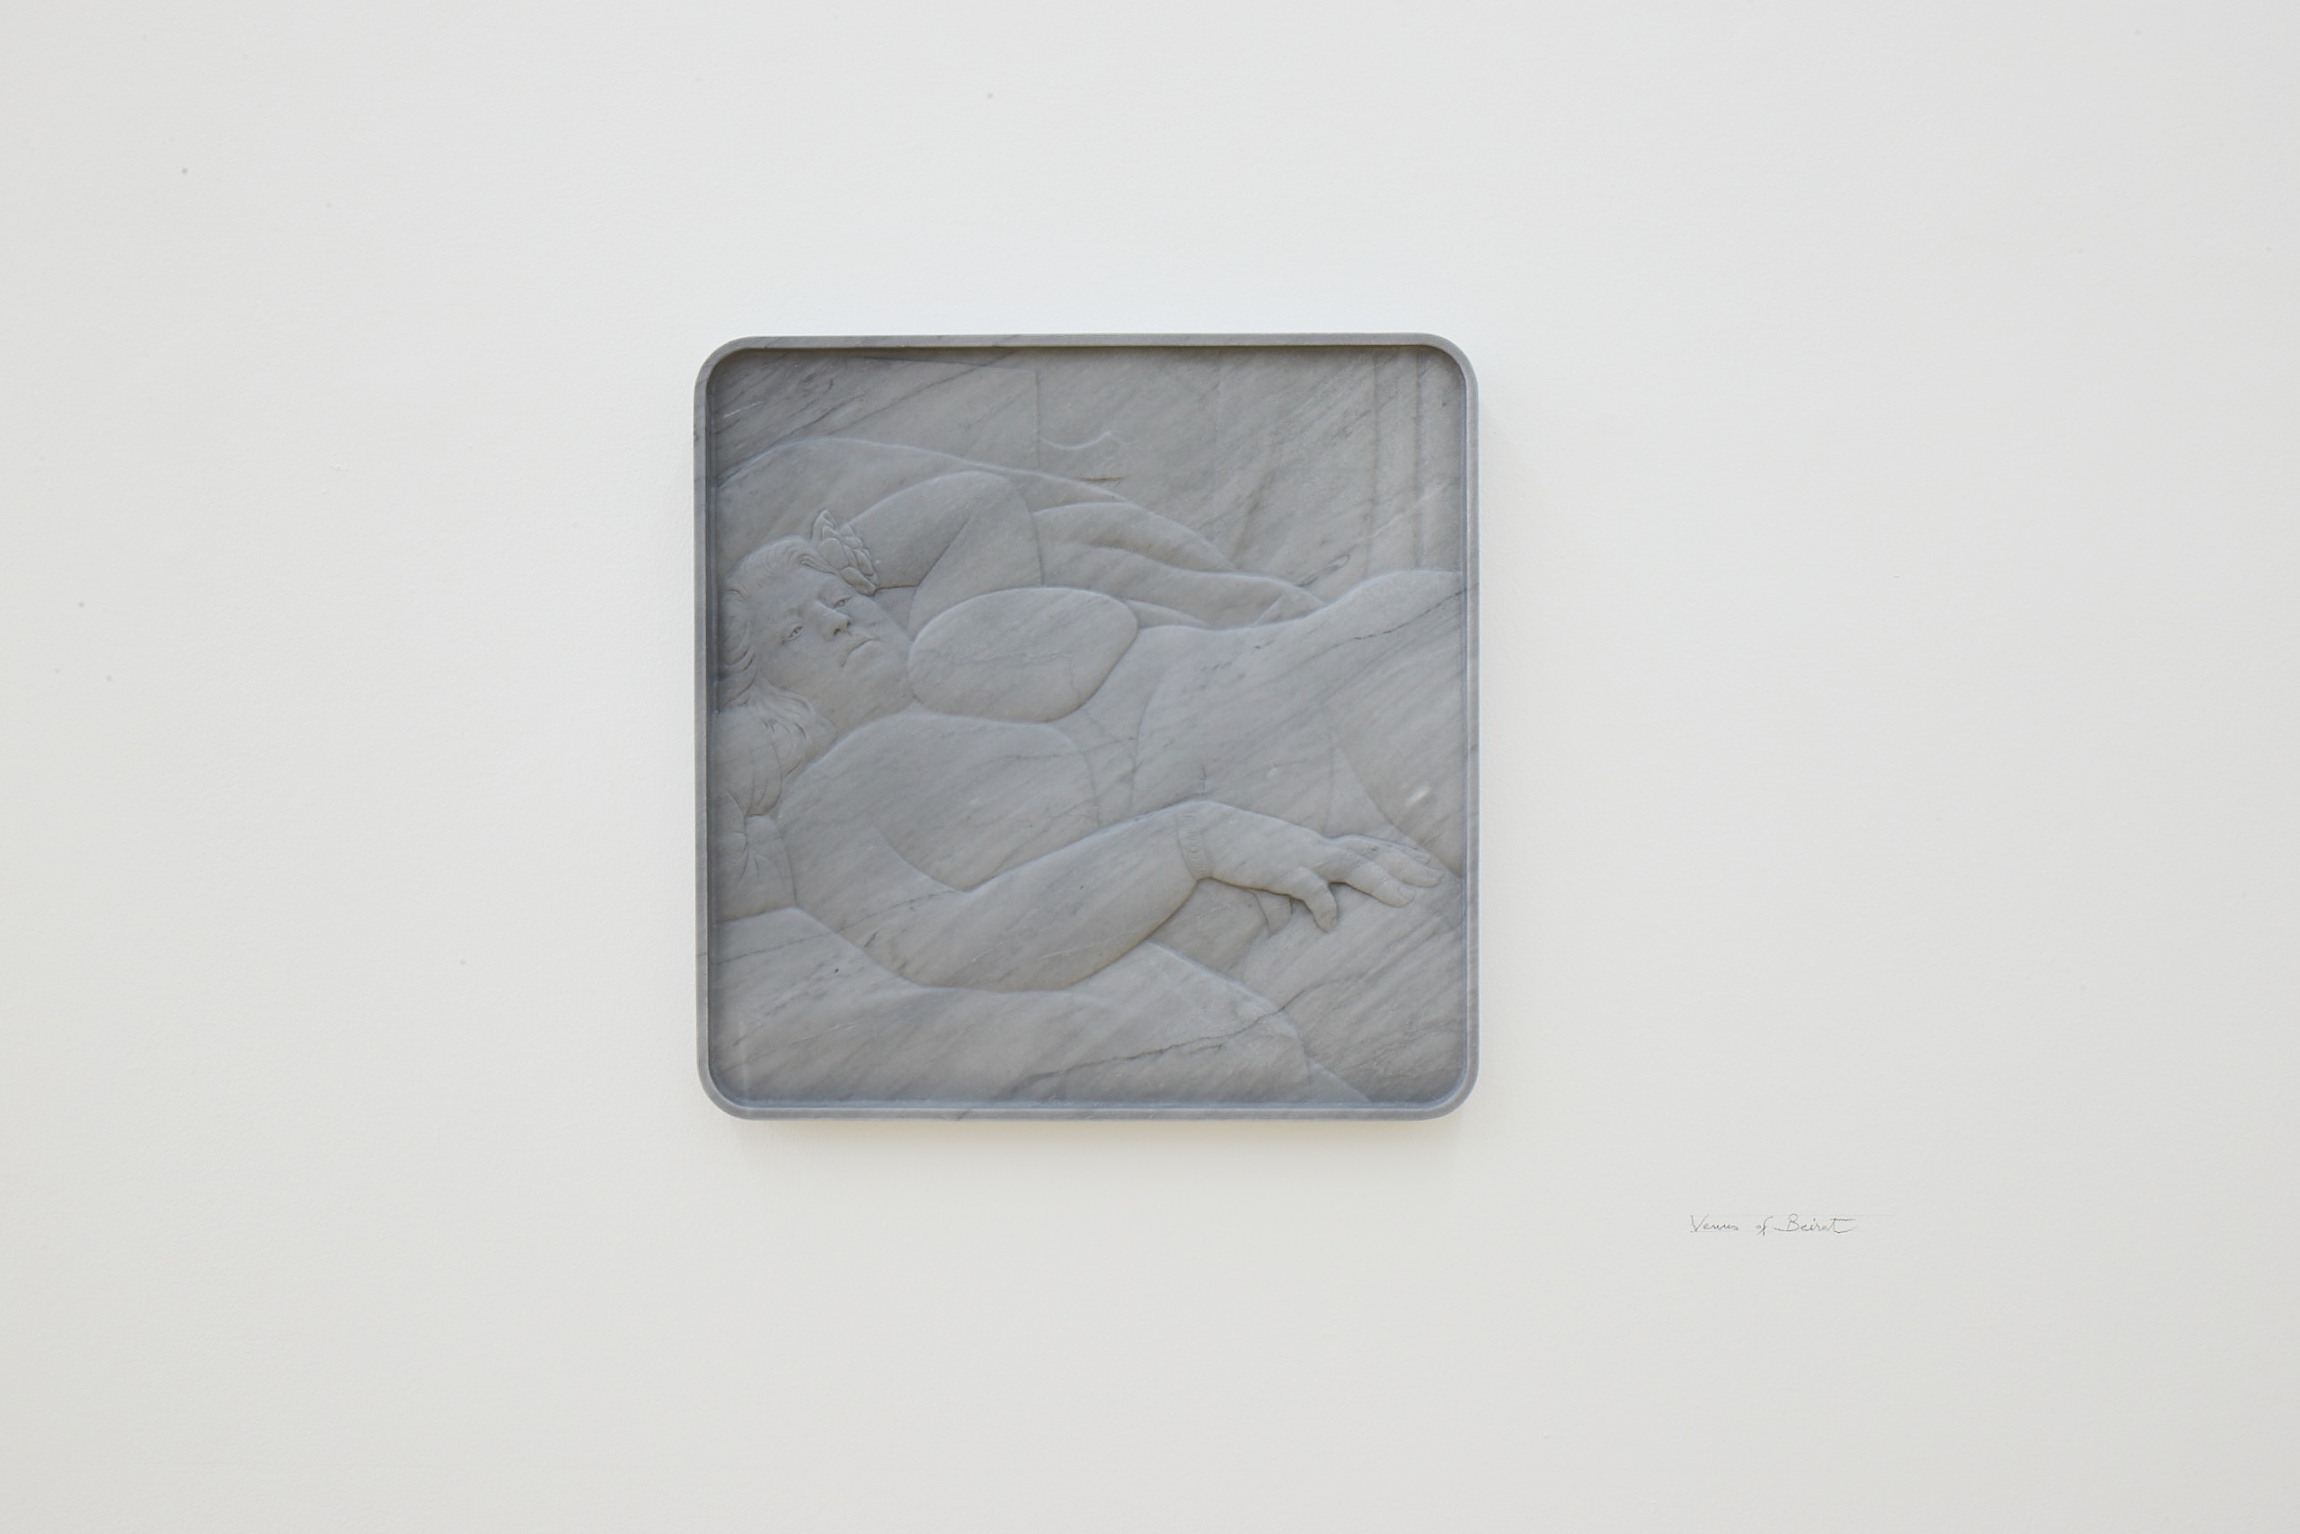 Akram Zaatari, Venus of Beirut from: The Fold, 2022, 3D routed, hand-polished Grey Bardiglio imperiale, 50,5 x 50,5 x 4 cm